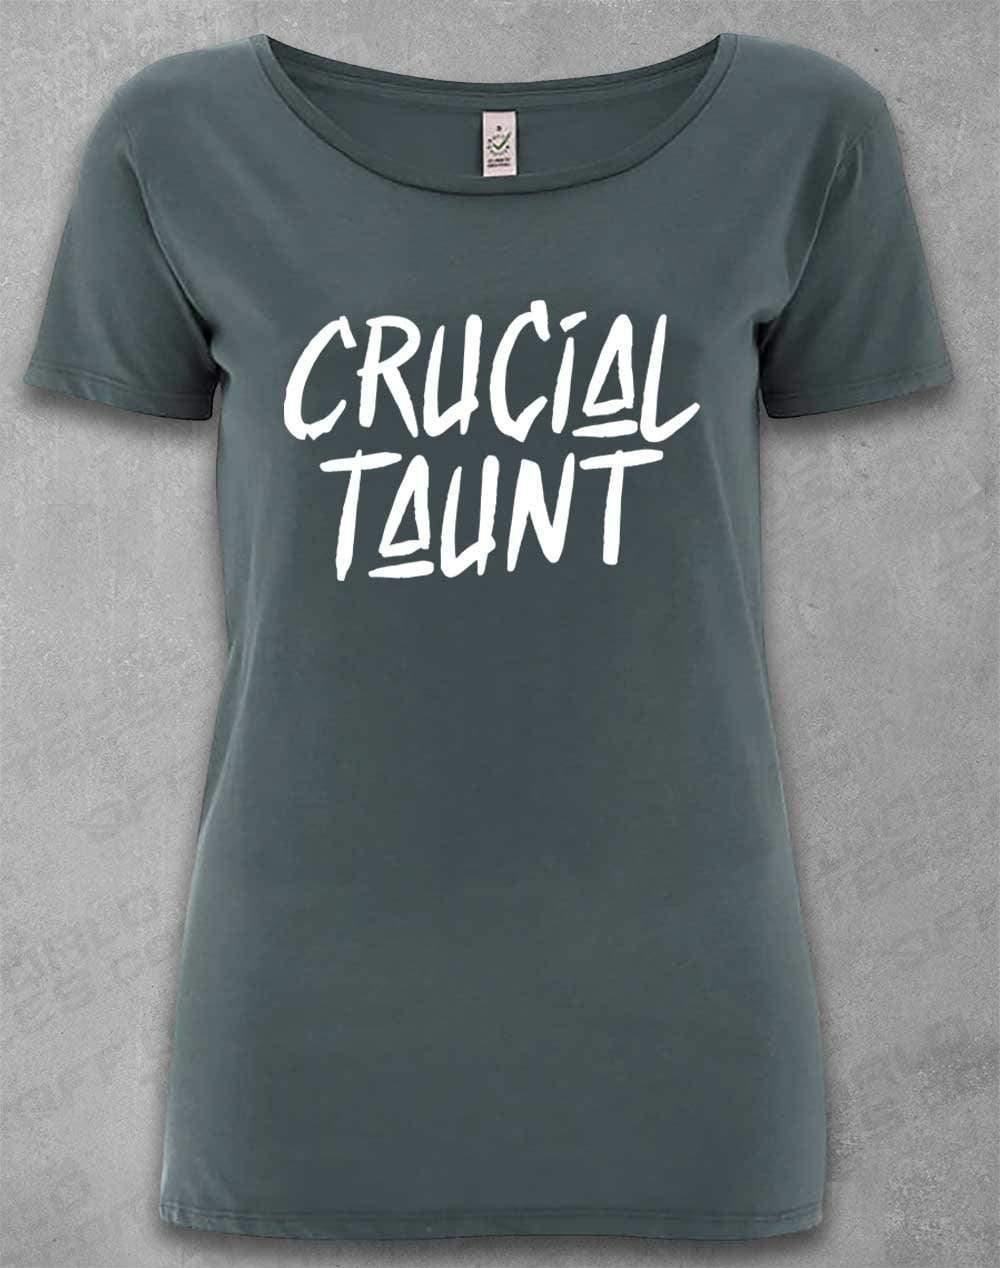 DELUXE Crucial Taunt Organic Scoop Neck T-Shirt 8-10 / Light Charcoal  - Off World Tees